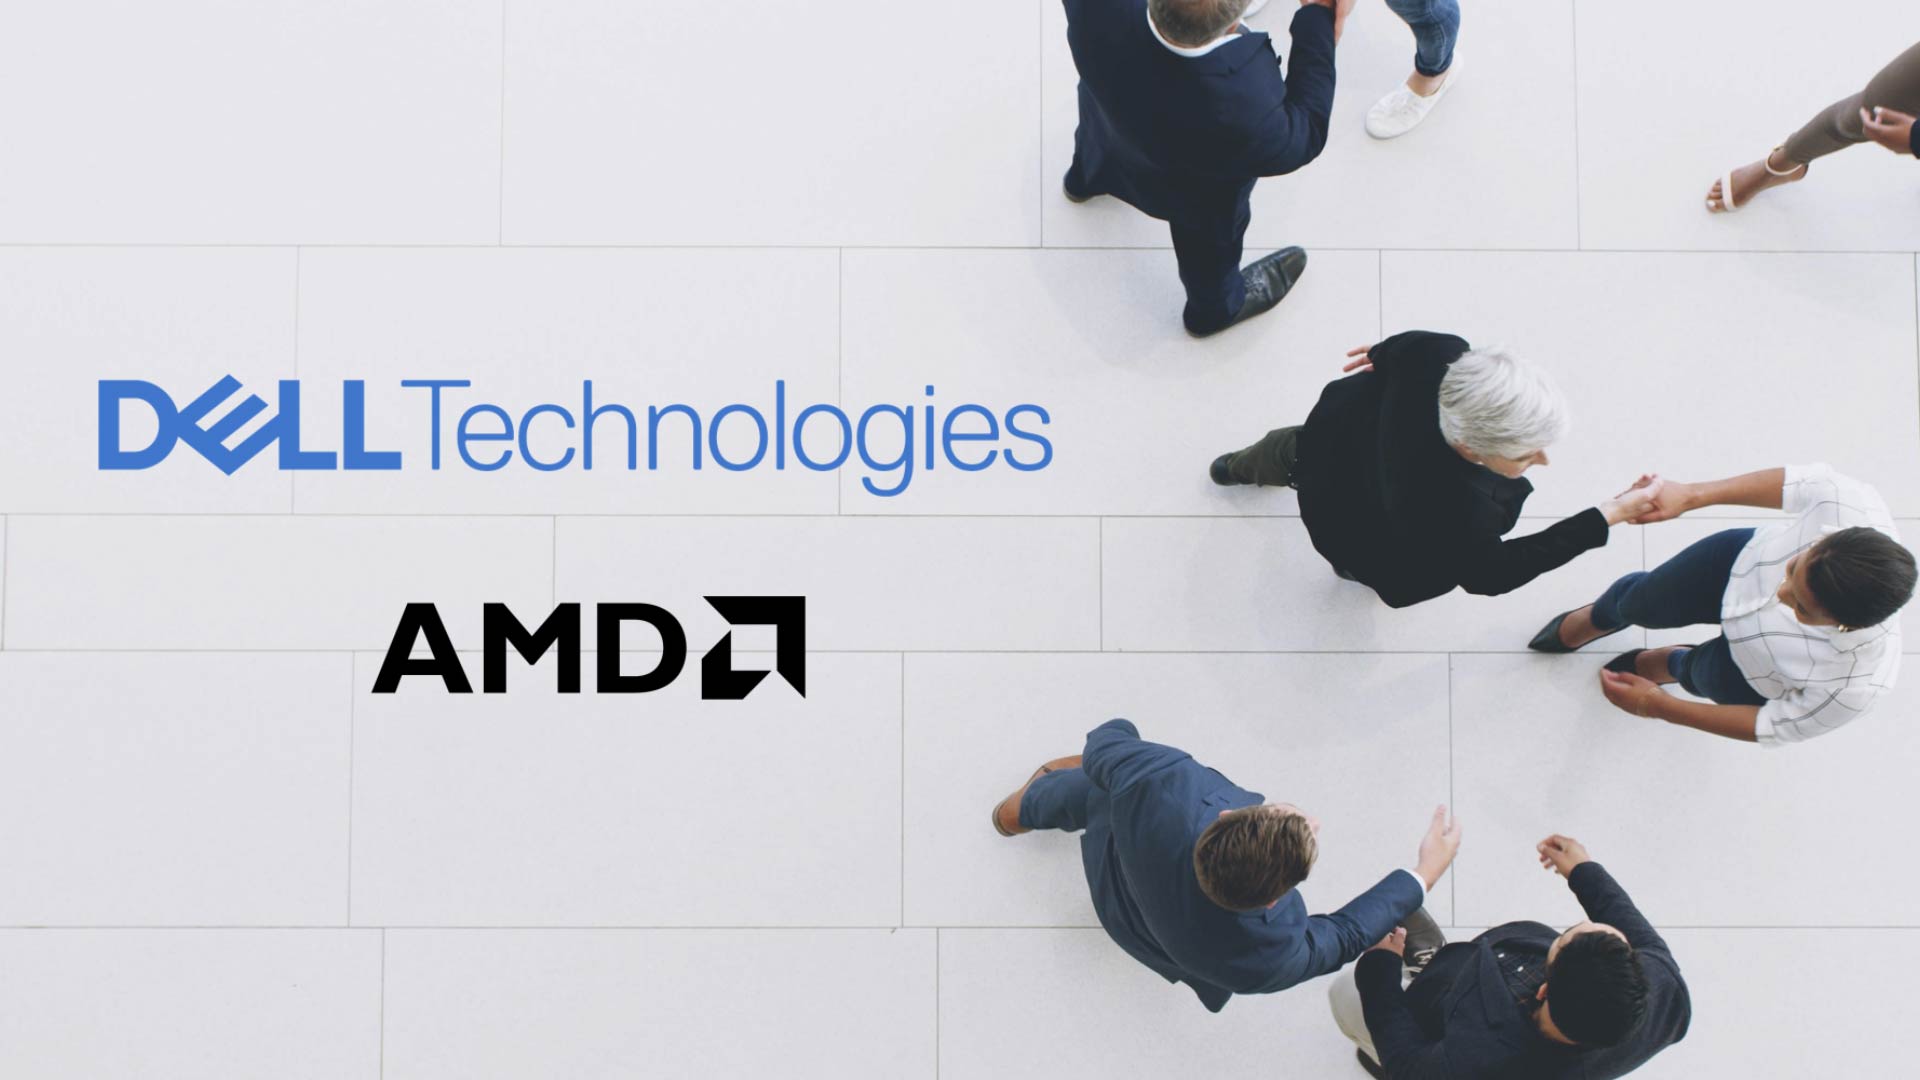 Drive Innovation Forward with Dell and AMD - 90s Video